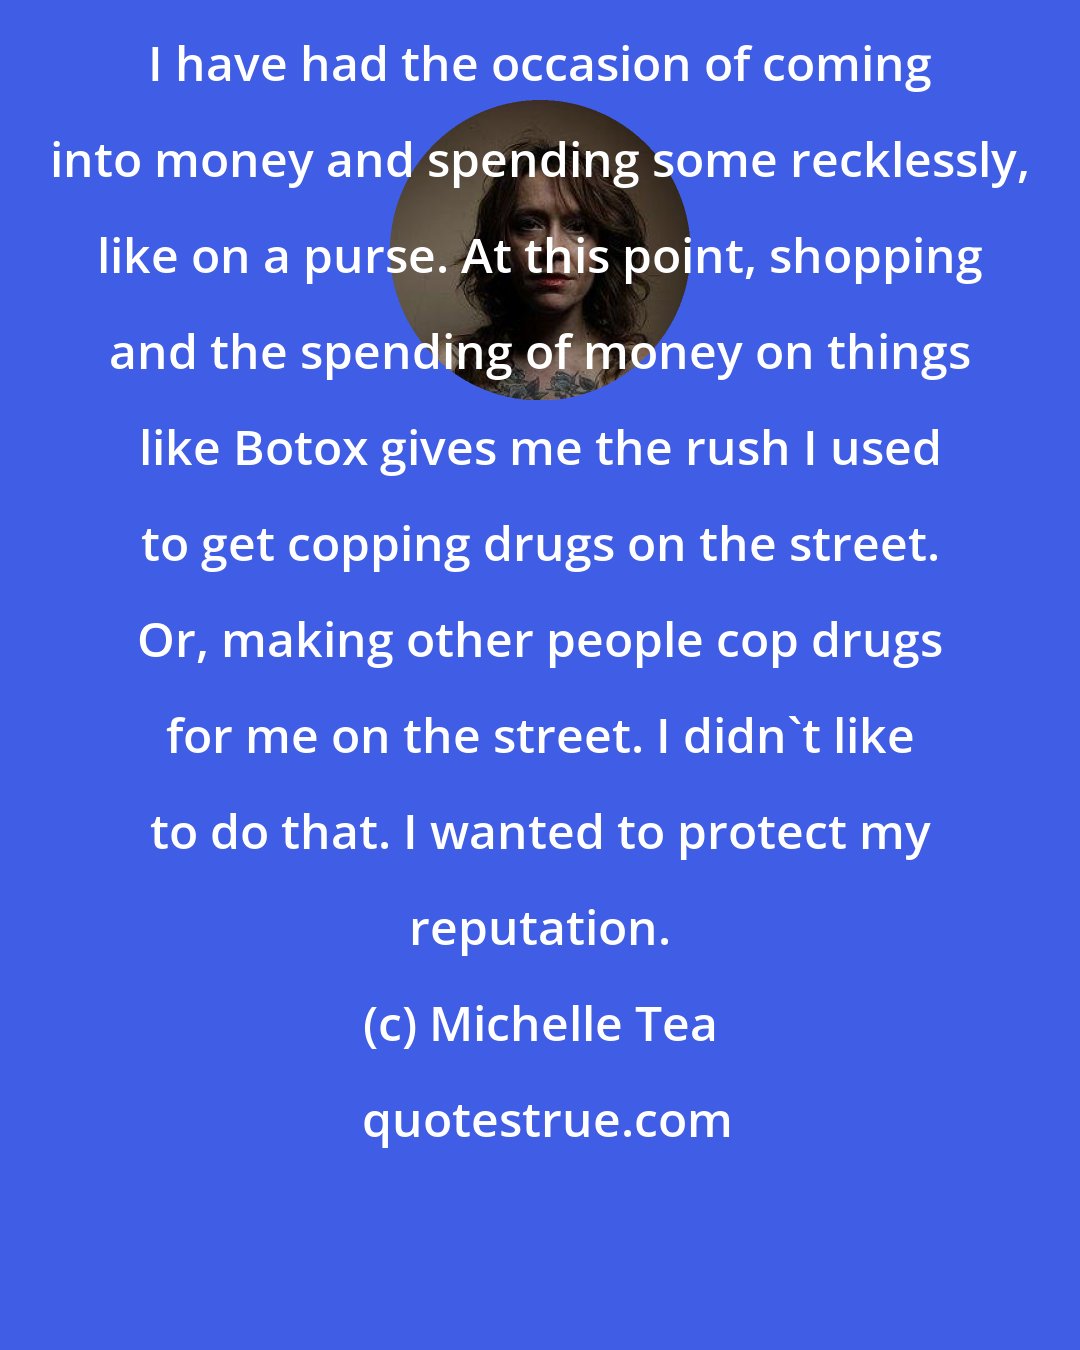 Michelle Tea: I have had the occasion of coming into money and spending some recklessly, like on a purse. At this point, shopping and the spending of money on things like Botox gives me the rush I used to get copping drugs on the street. Or, making other people cop drugs for me on the street. I didn't like to do that. I wanted to protect my reputation.